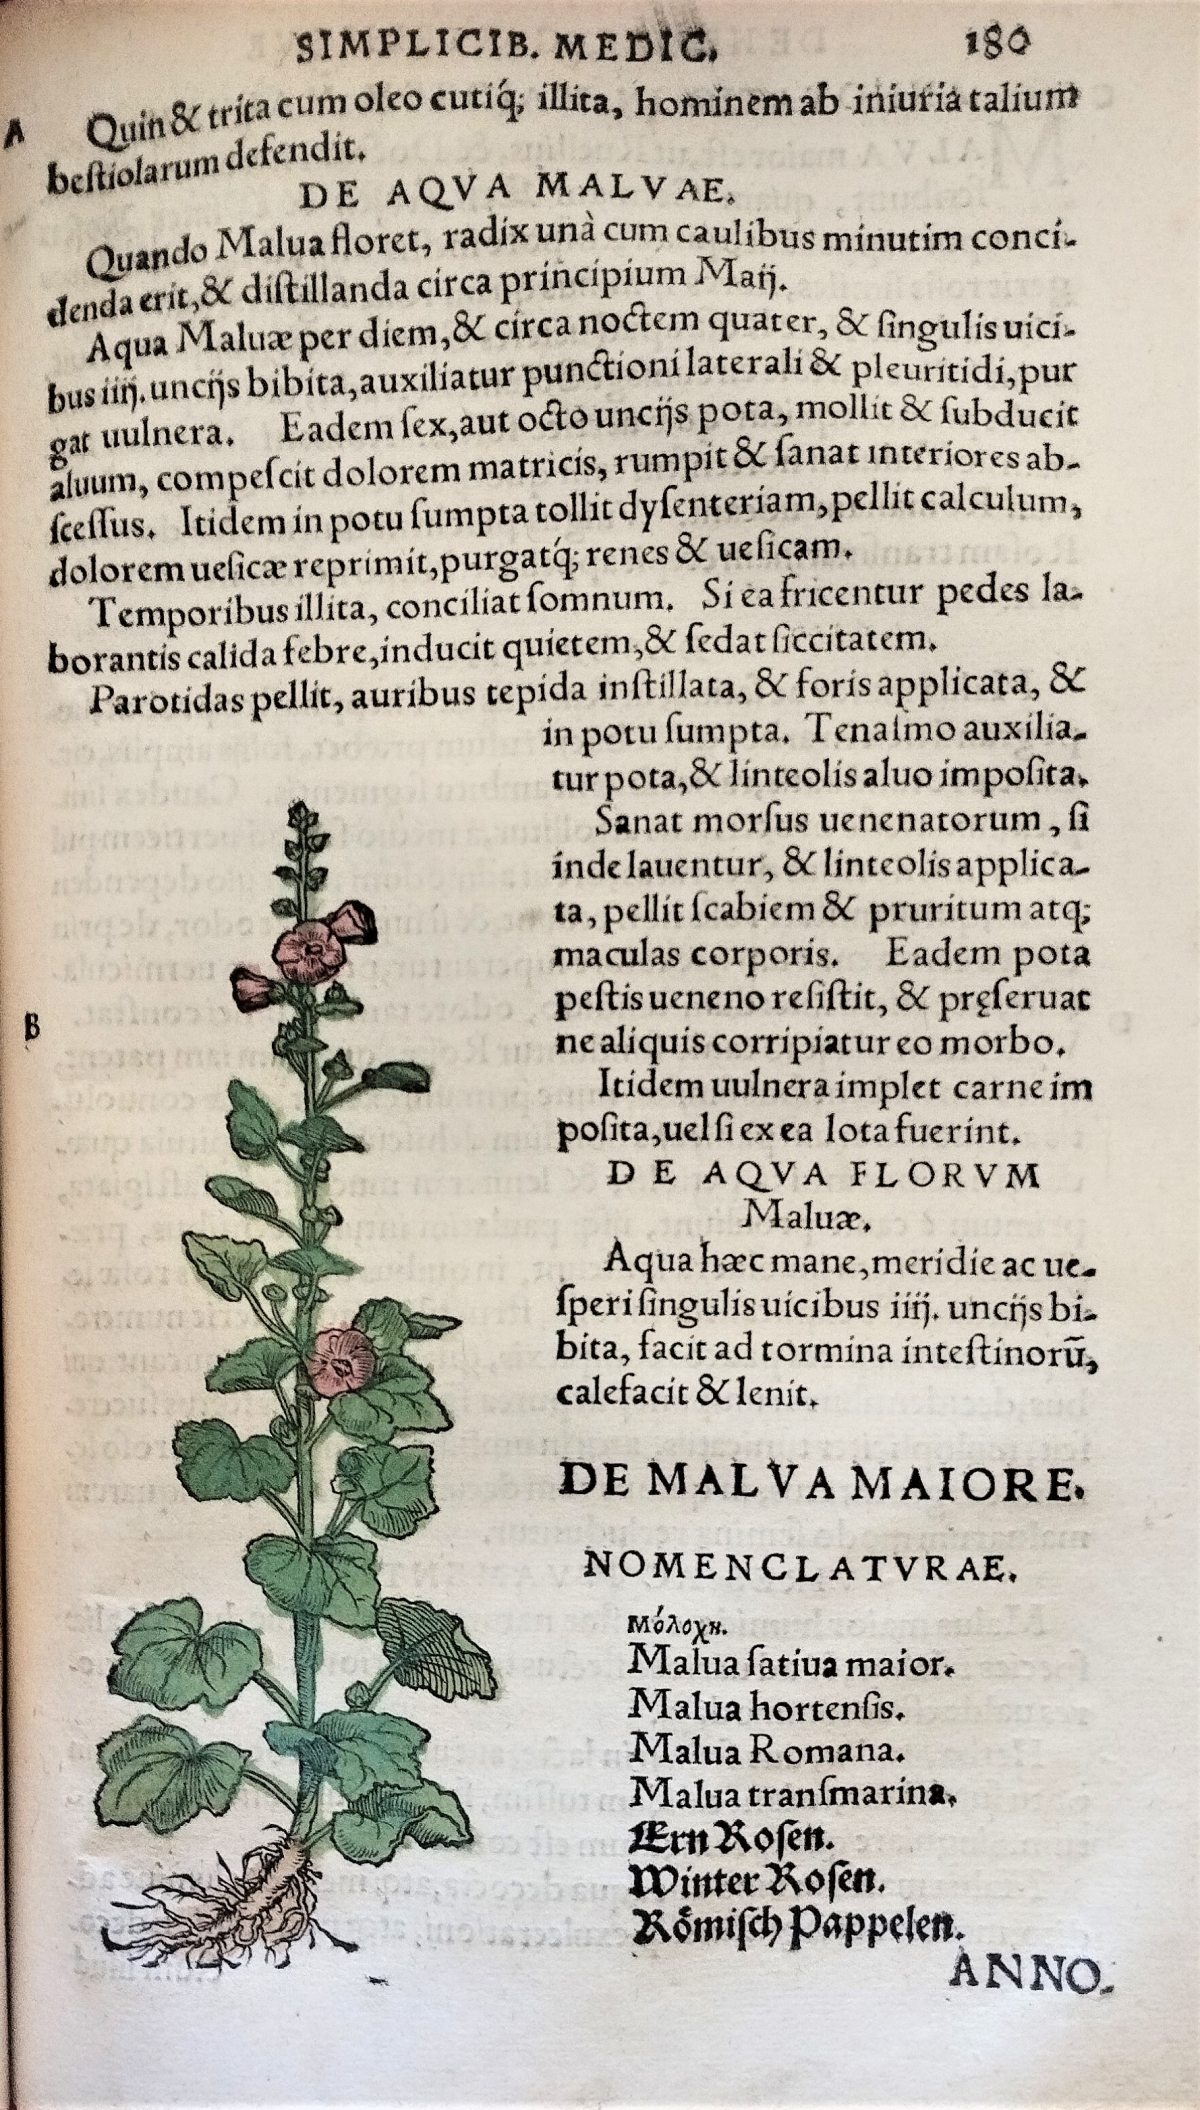 Page with the nomenclature, latin text description and hand painted illustration of the mallow plant and flowers.